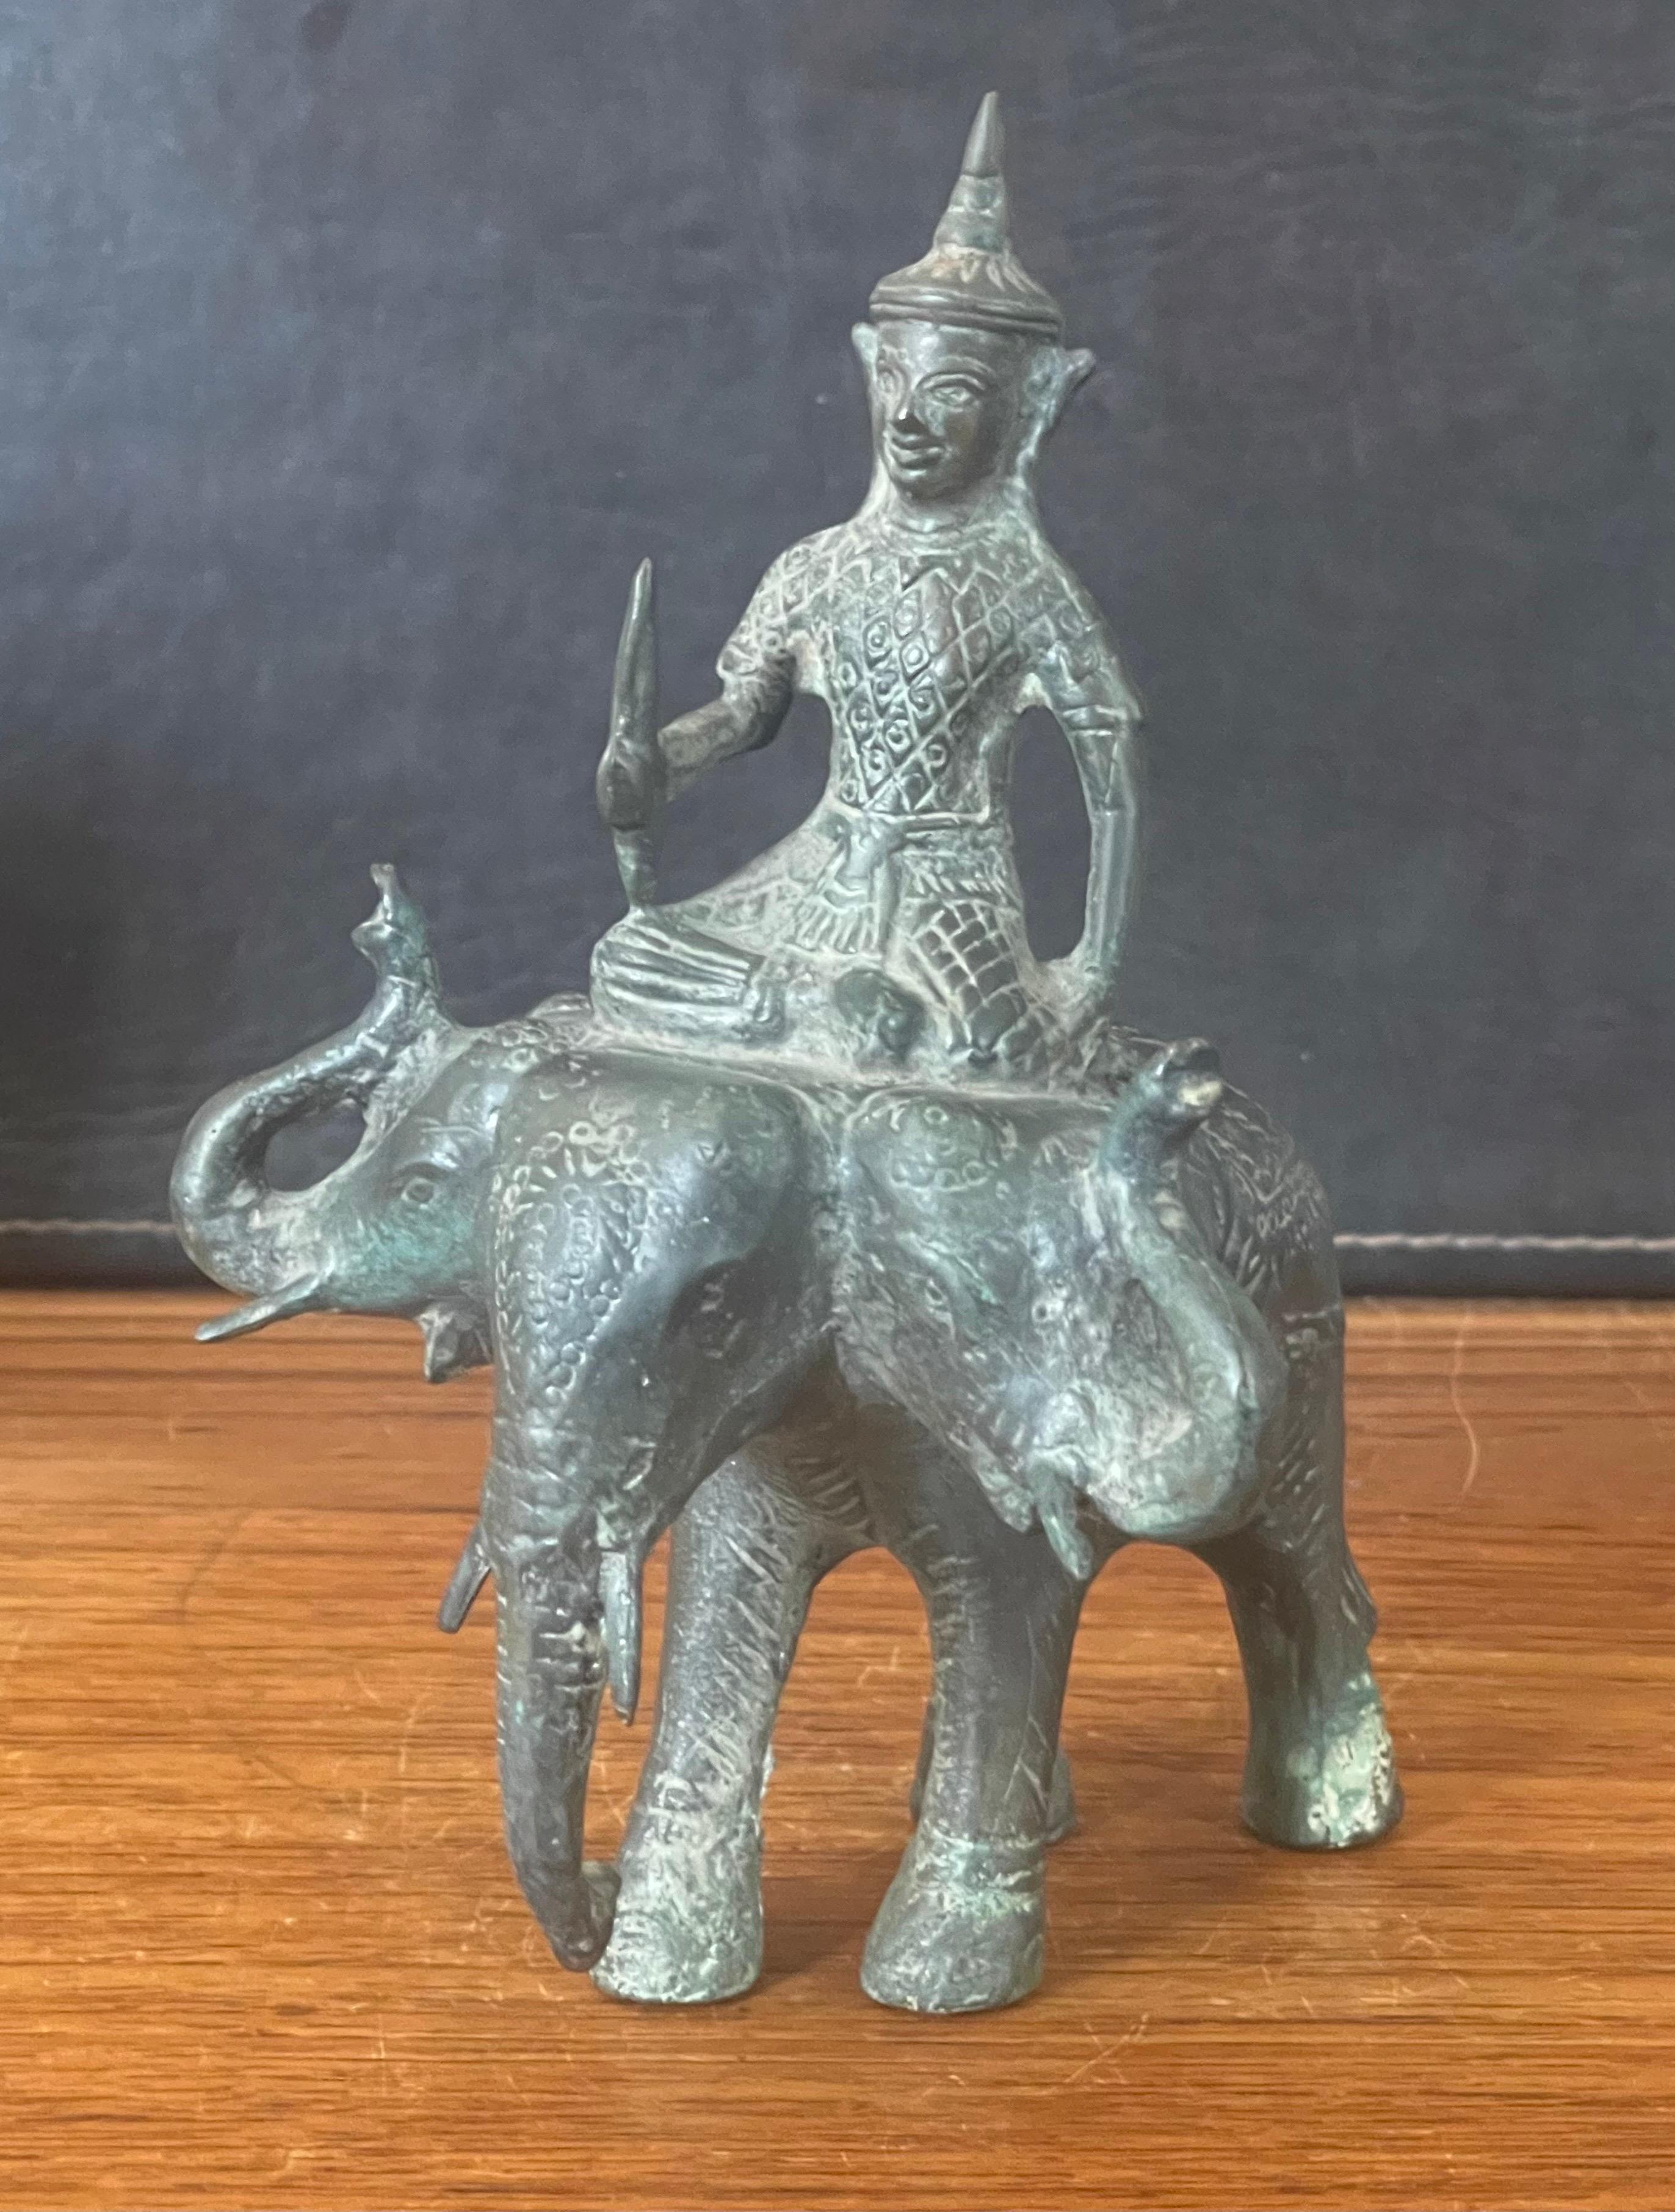 Well casted, heavy bronze, Buddha riding three headed elephant sculpture, circa 1960s. The piece depicts Indra, Hindu deity (god of rain and thunder), riding a three-headed elephant (Erawan). The piece is in very good vintage condition and measures